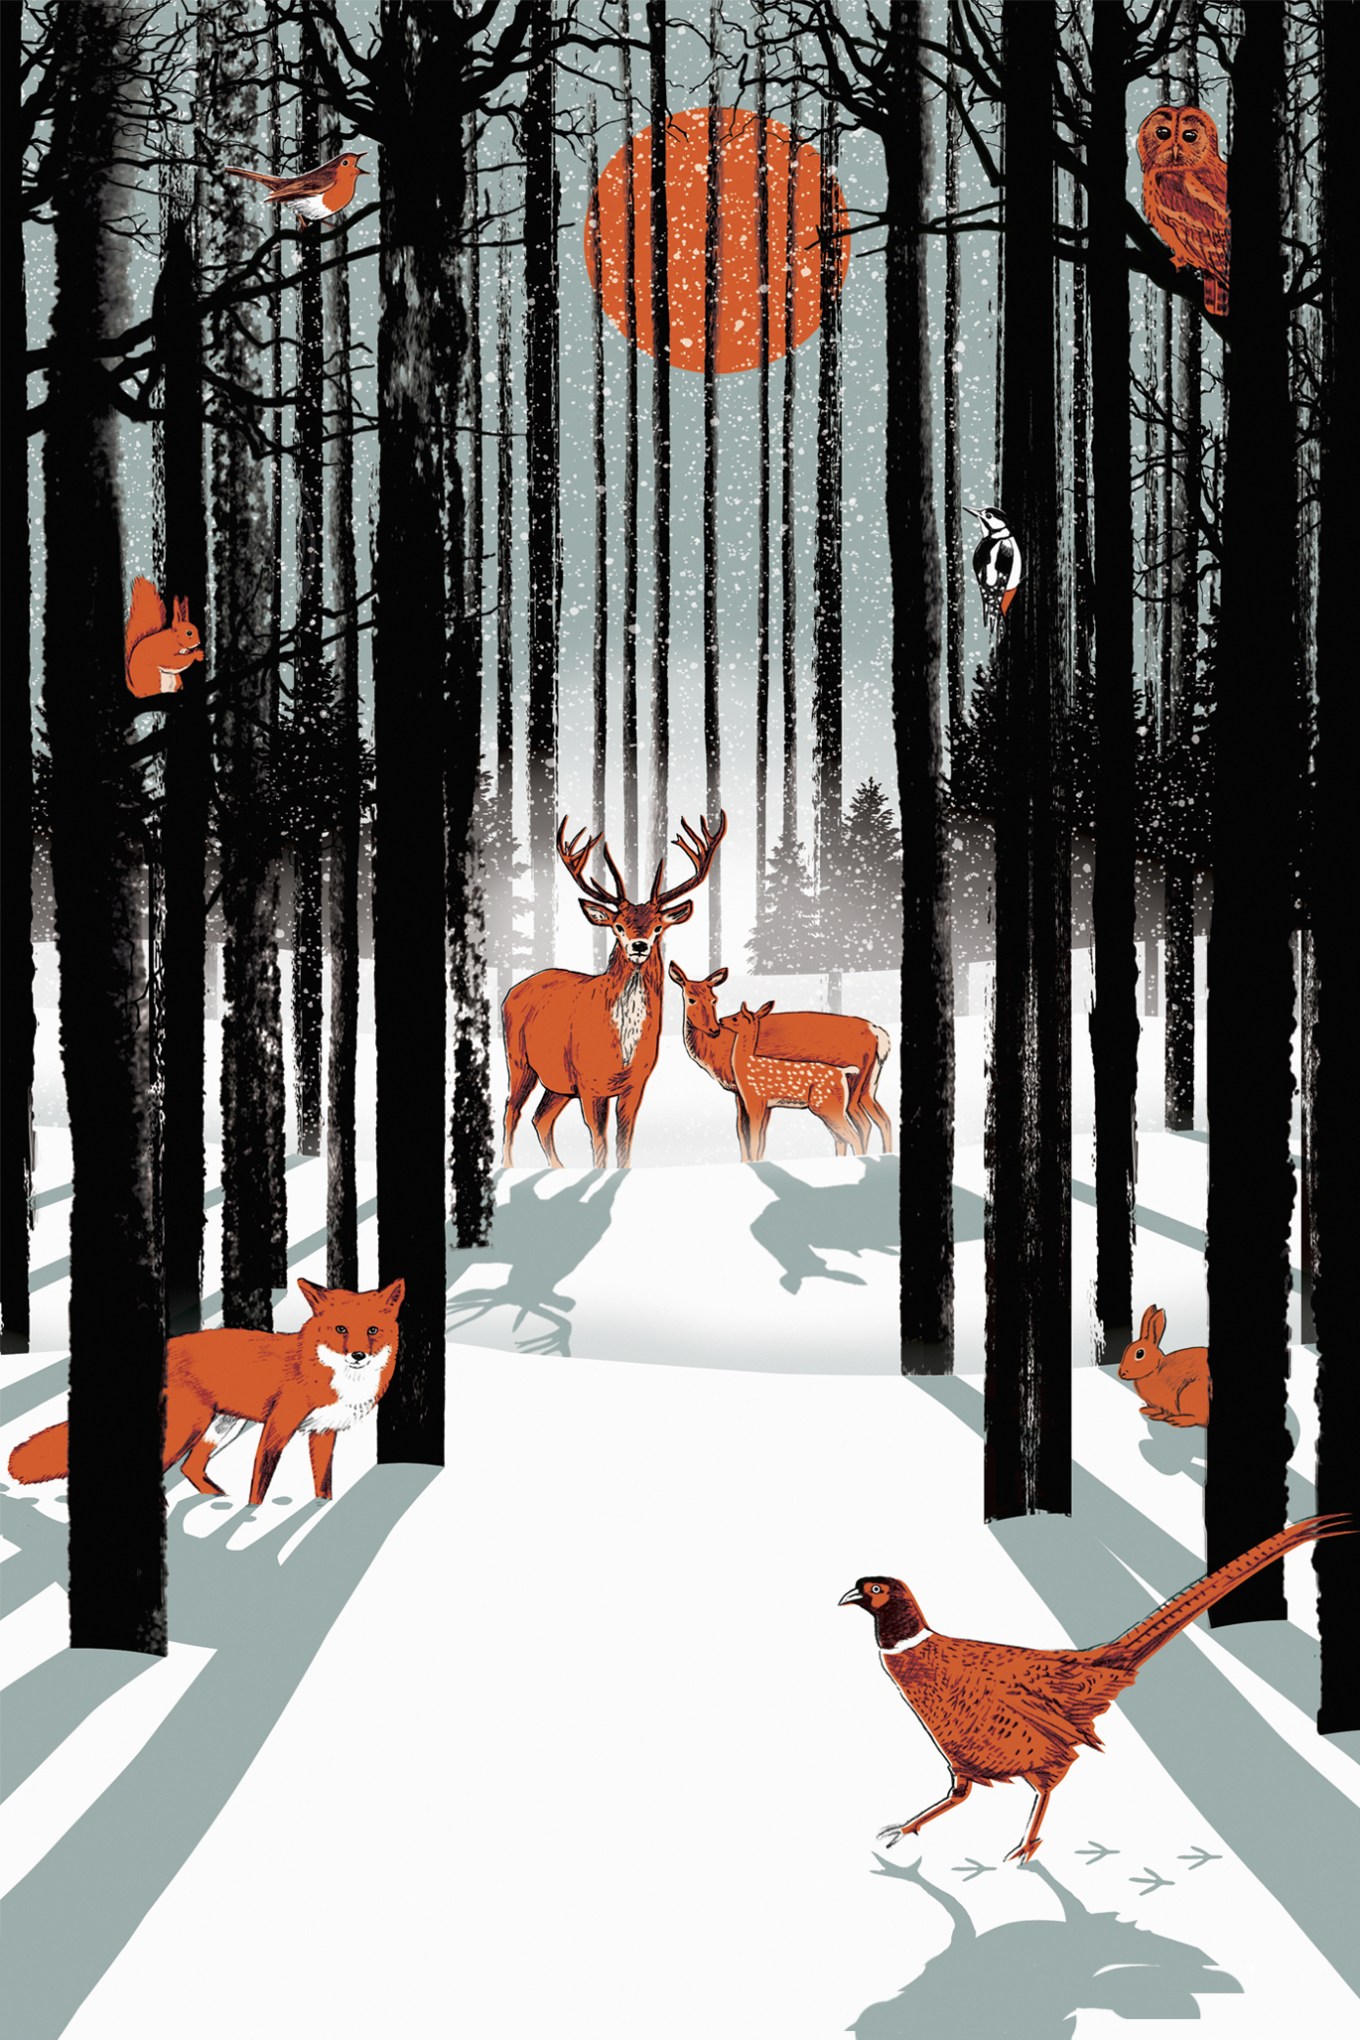 Illustration of animals standing in a snowy winter forest